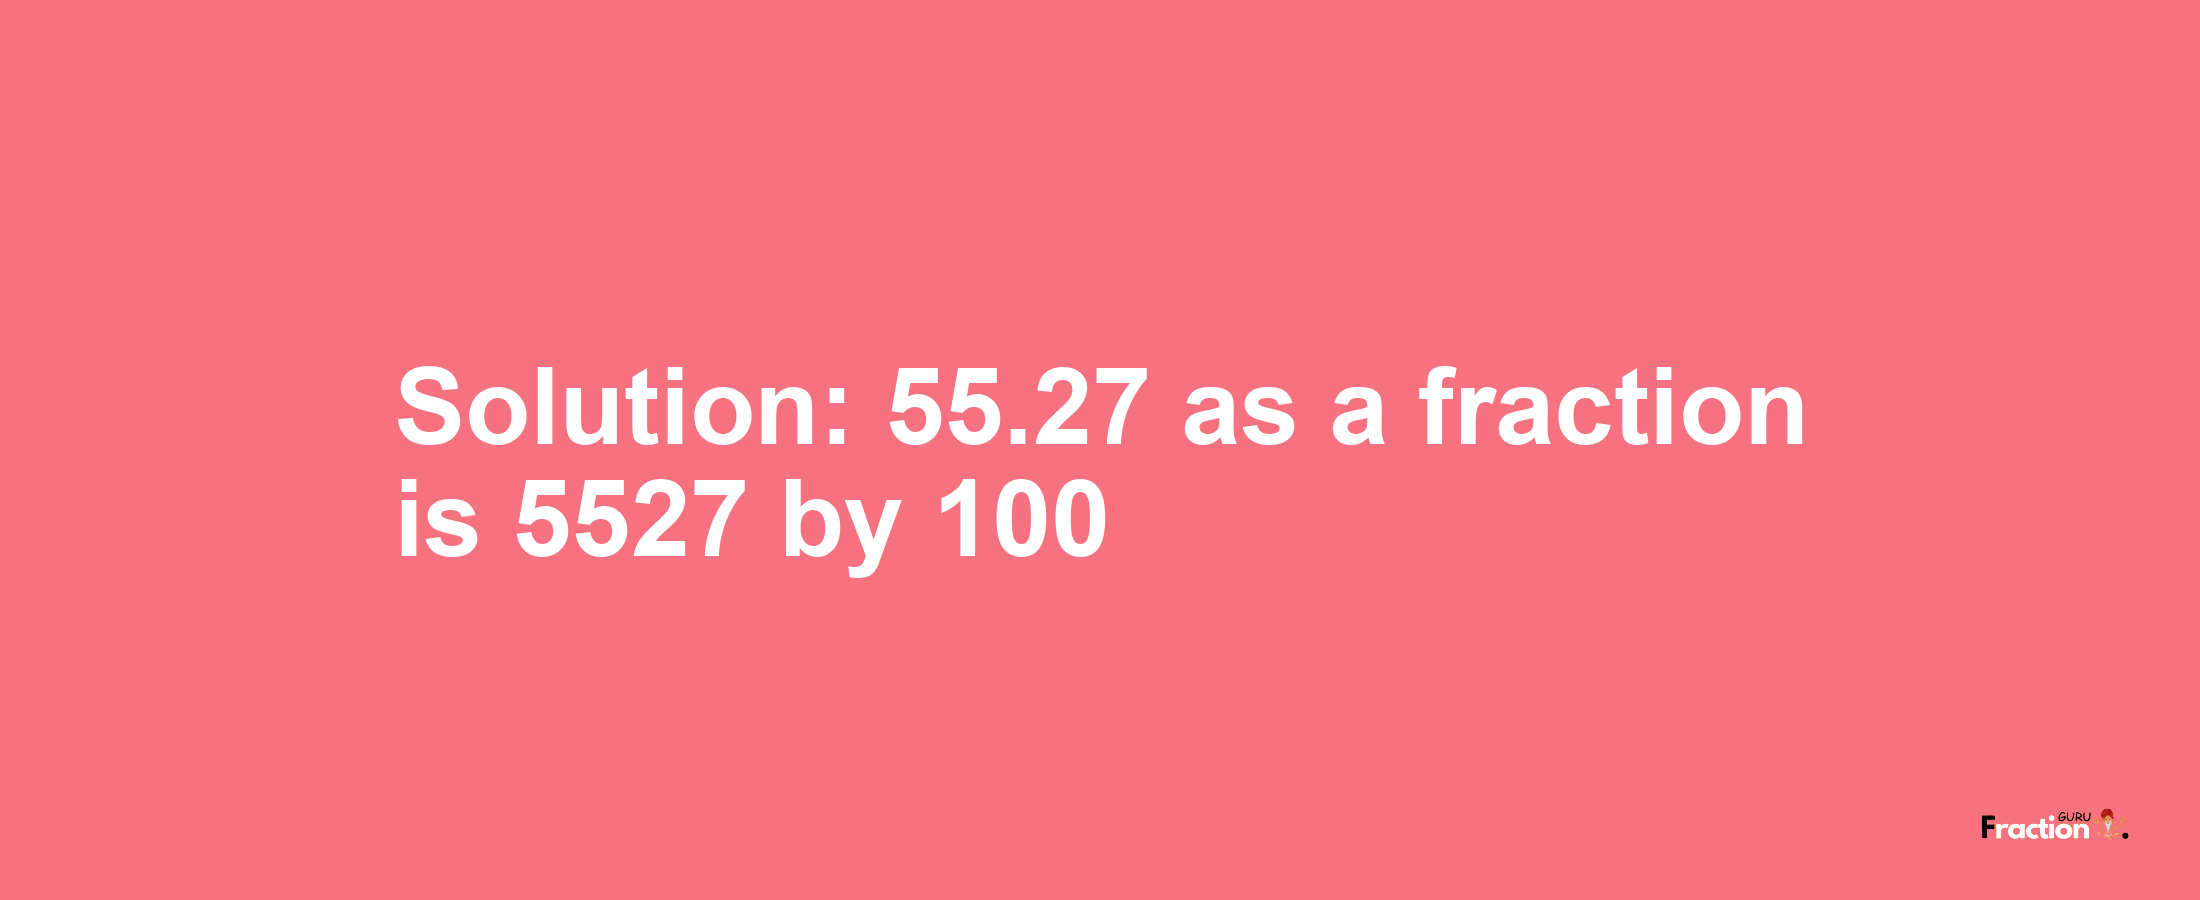 Solution:55.27 as a fraction is 5527/100